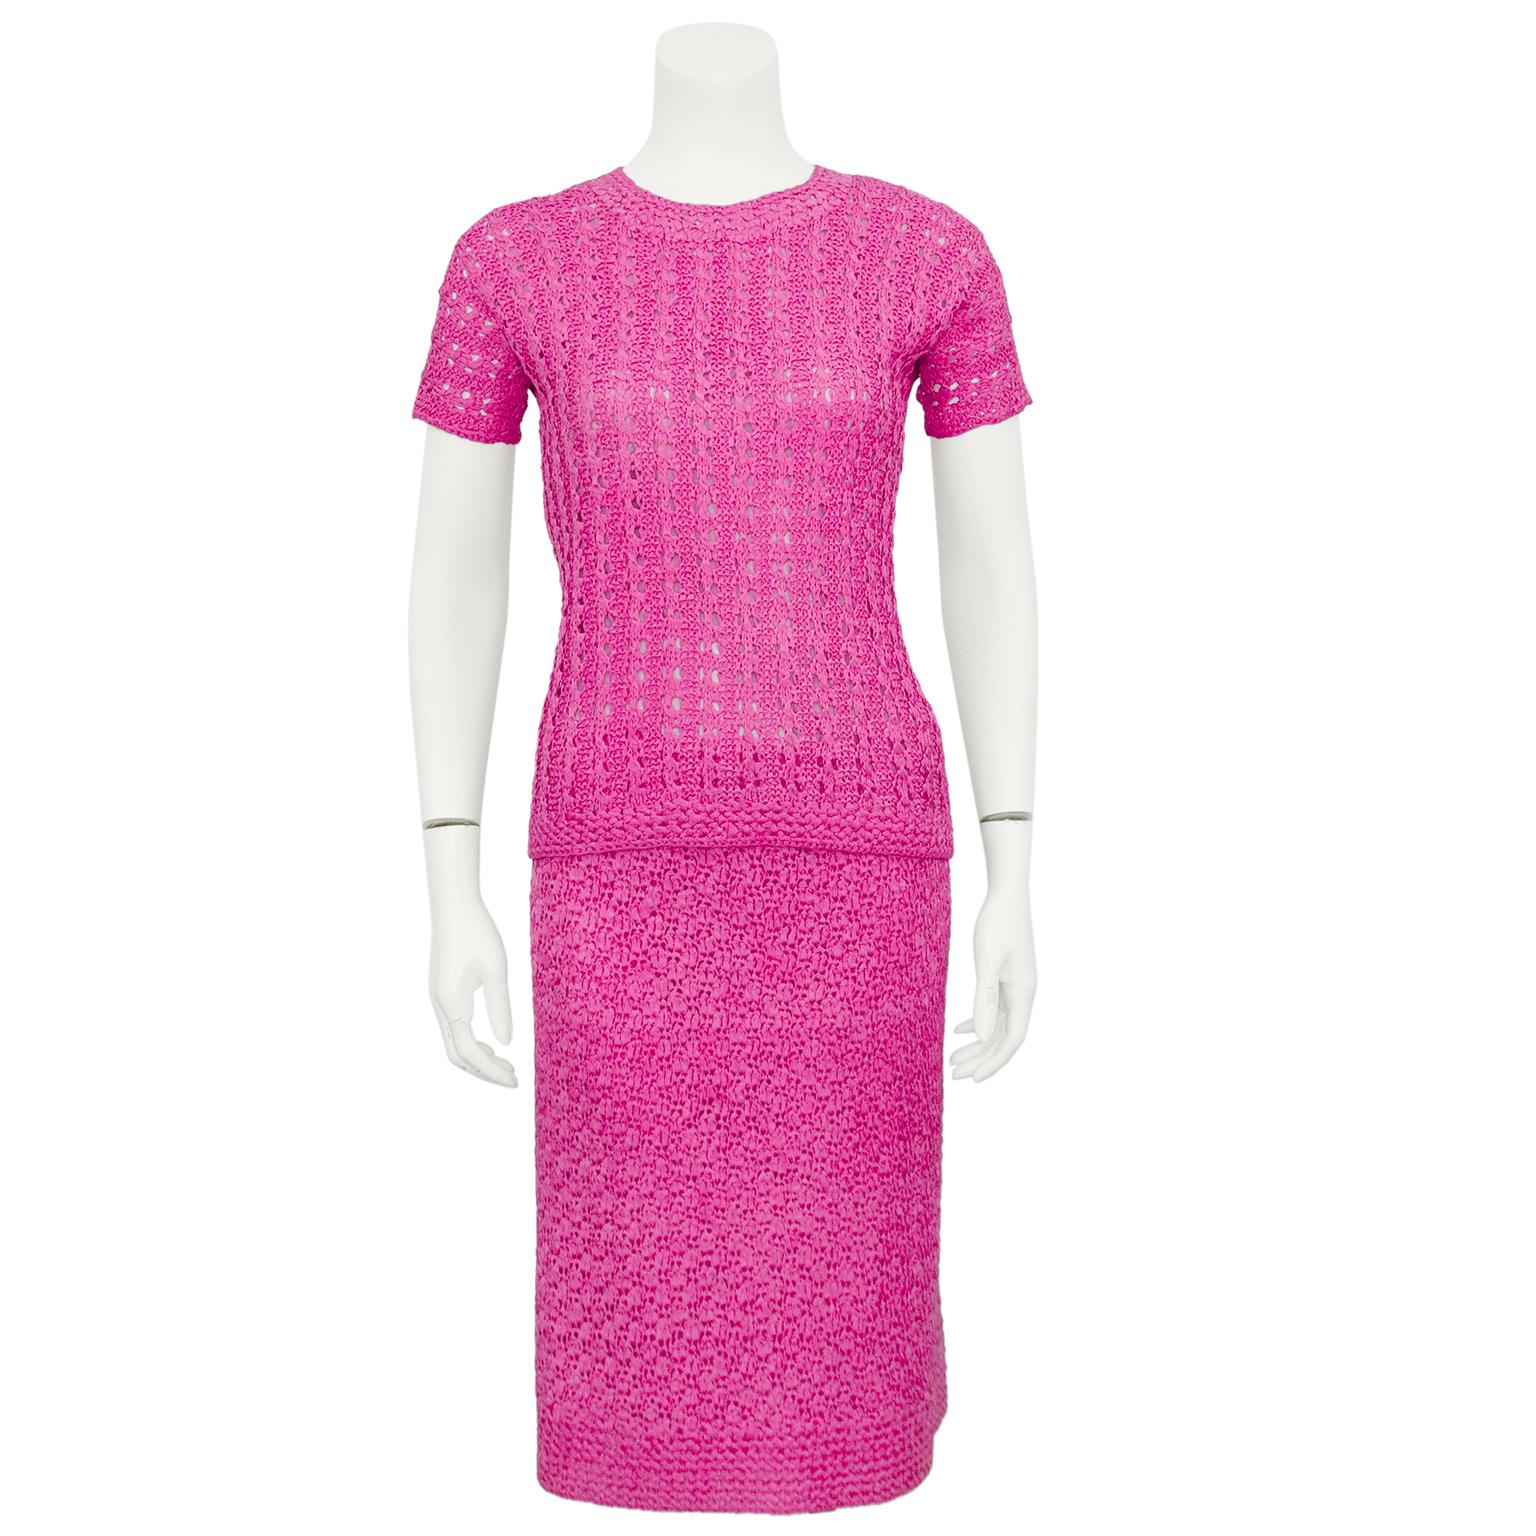 1960s bright pink crochet 3 piece suit by Lola Lemans. The set consists of a classic shaped blazer with a notched collar and three buttons, a crew neck short sleeve t-shirt and a classic high waisted straight knee length skirt. Very charming as a